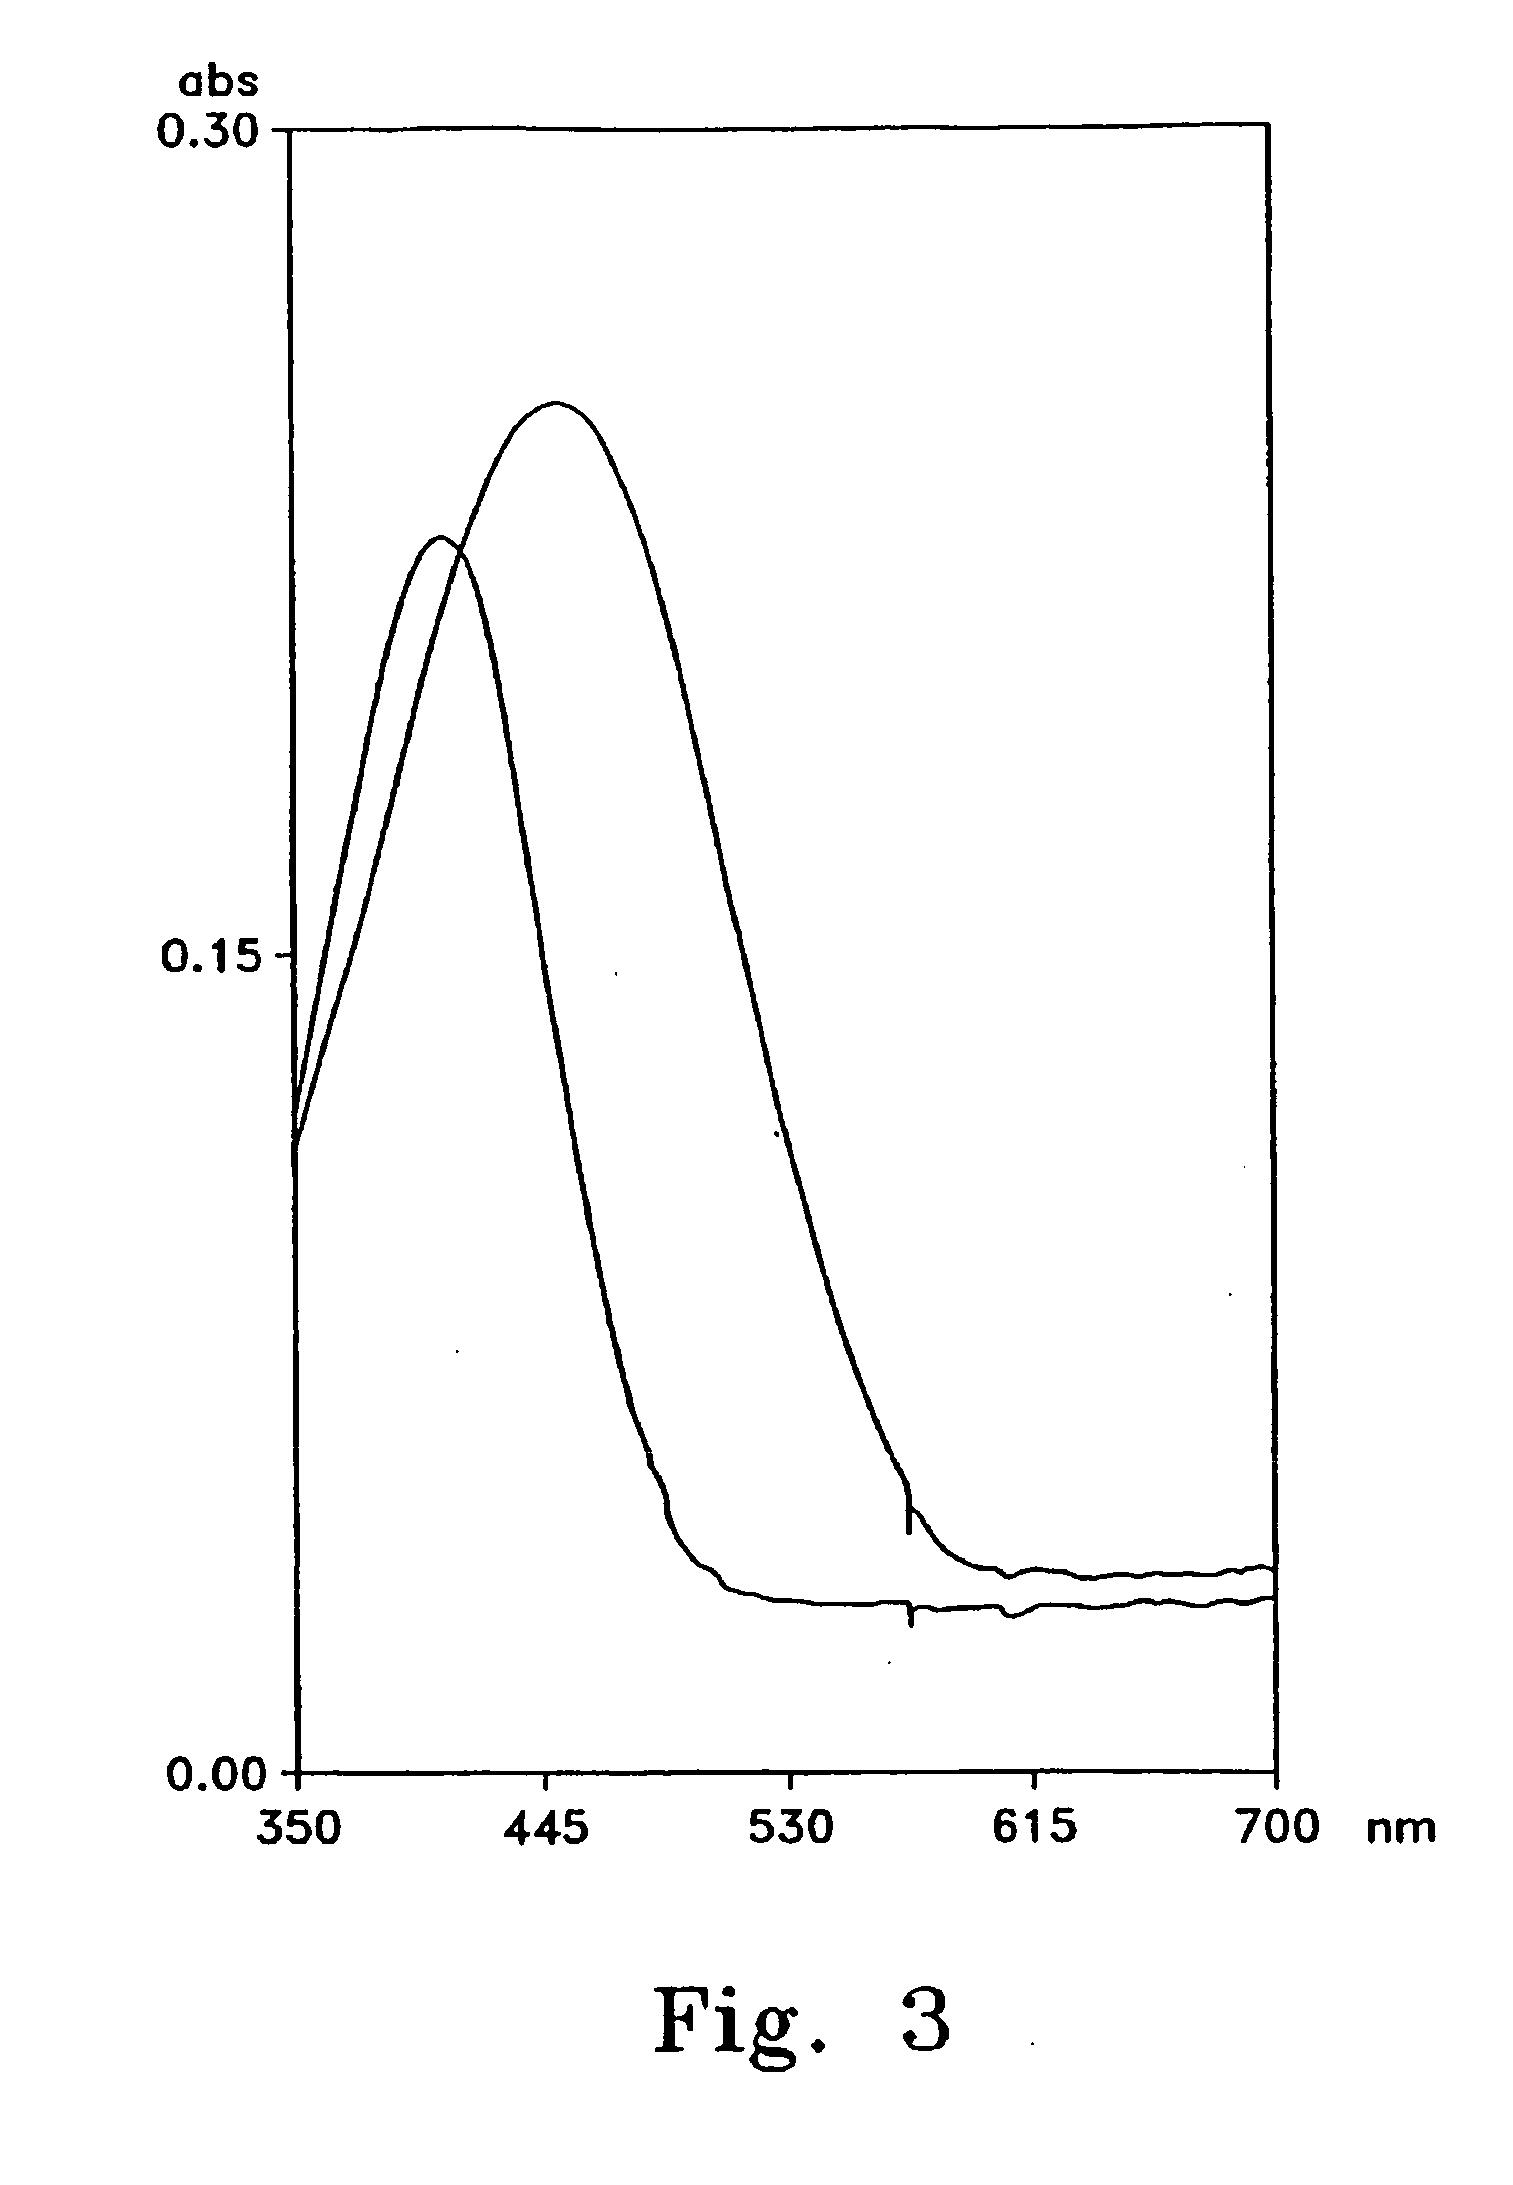 Treatment of diabetes with copper binding compounds